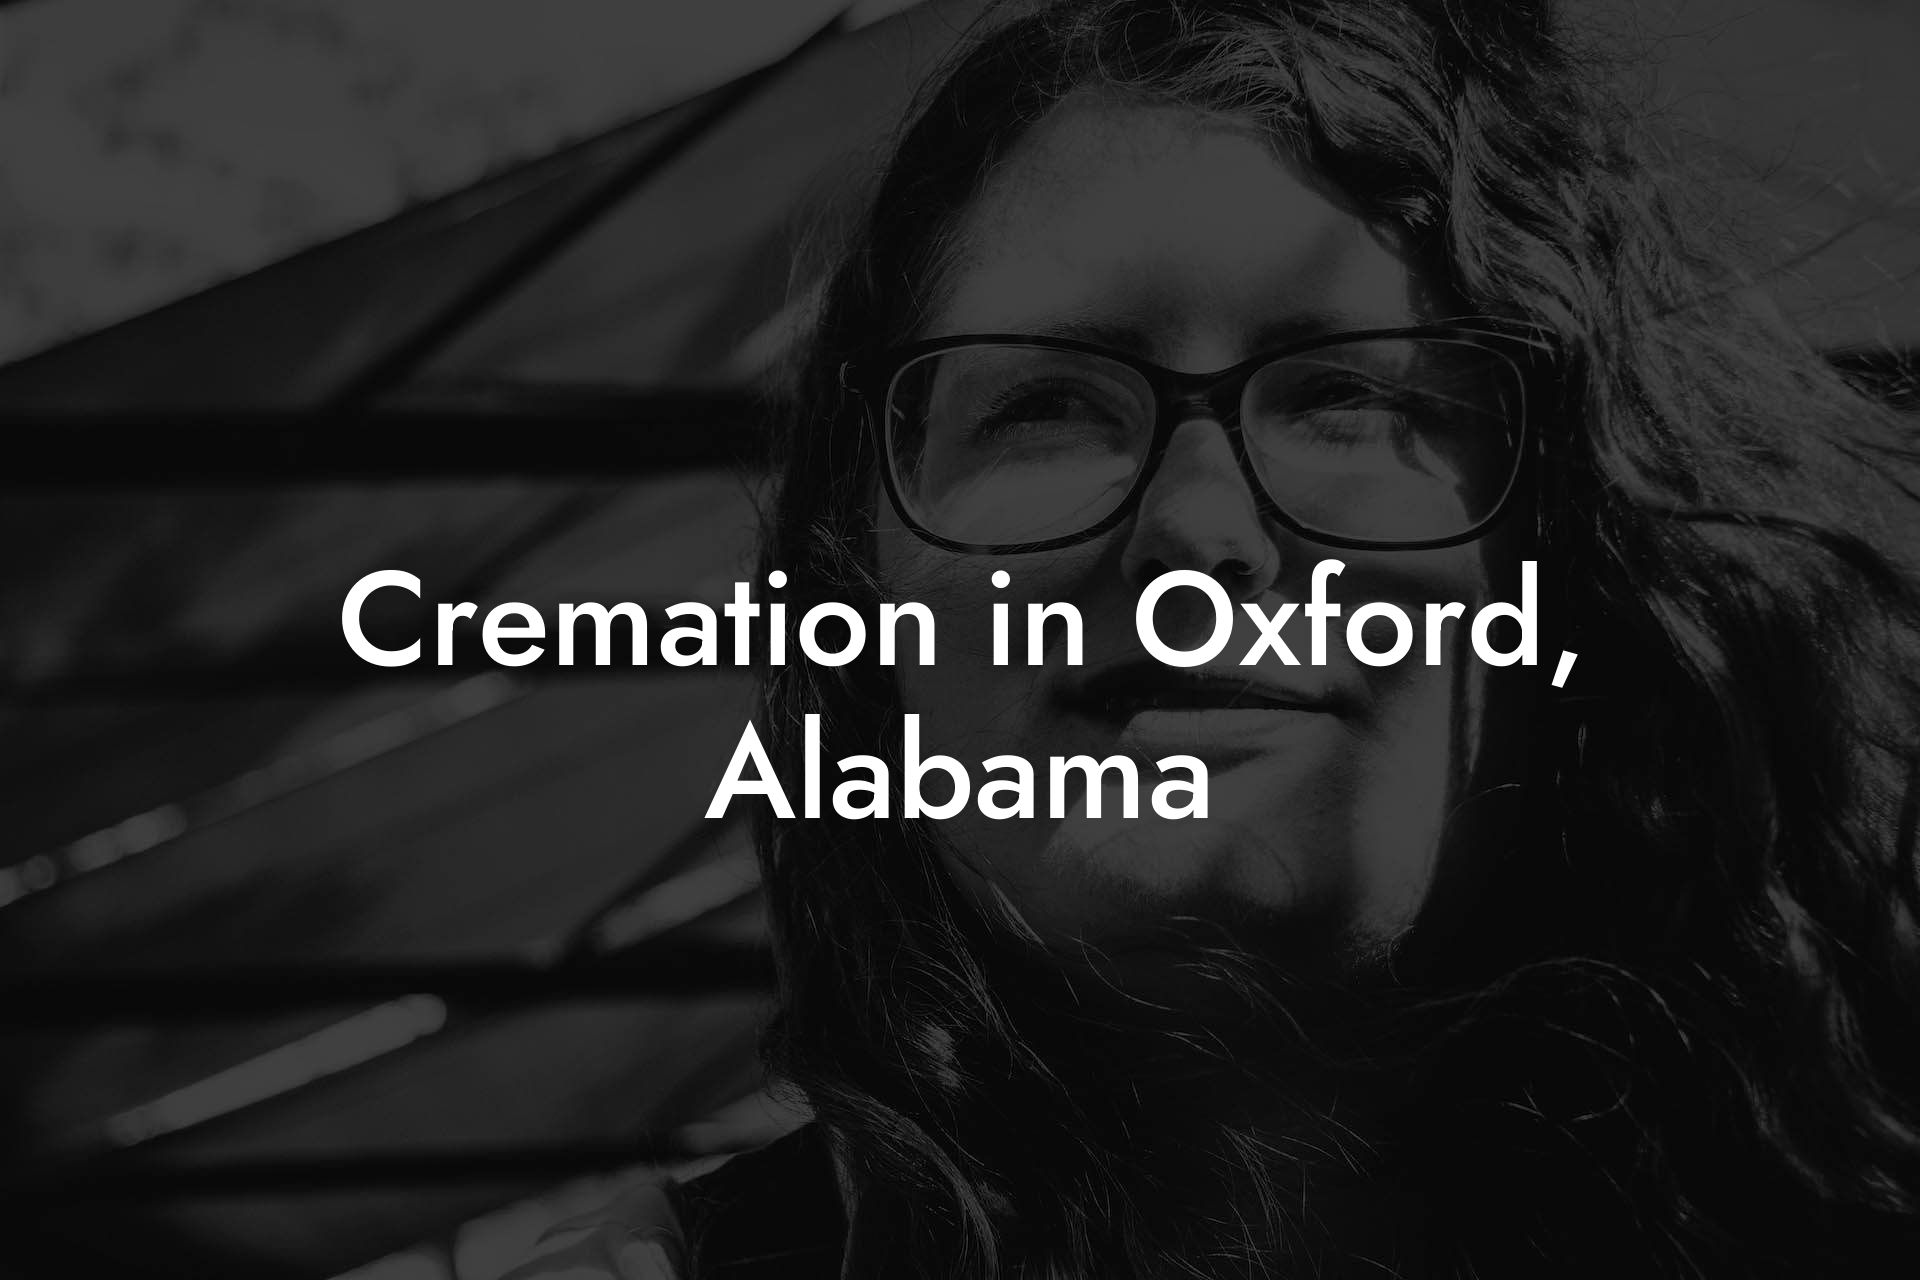 Cremation in Oxford, Alabama